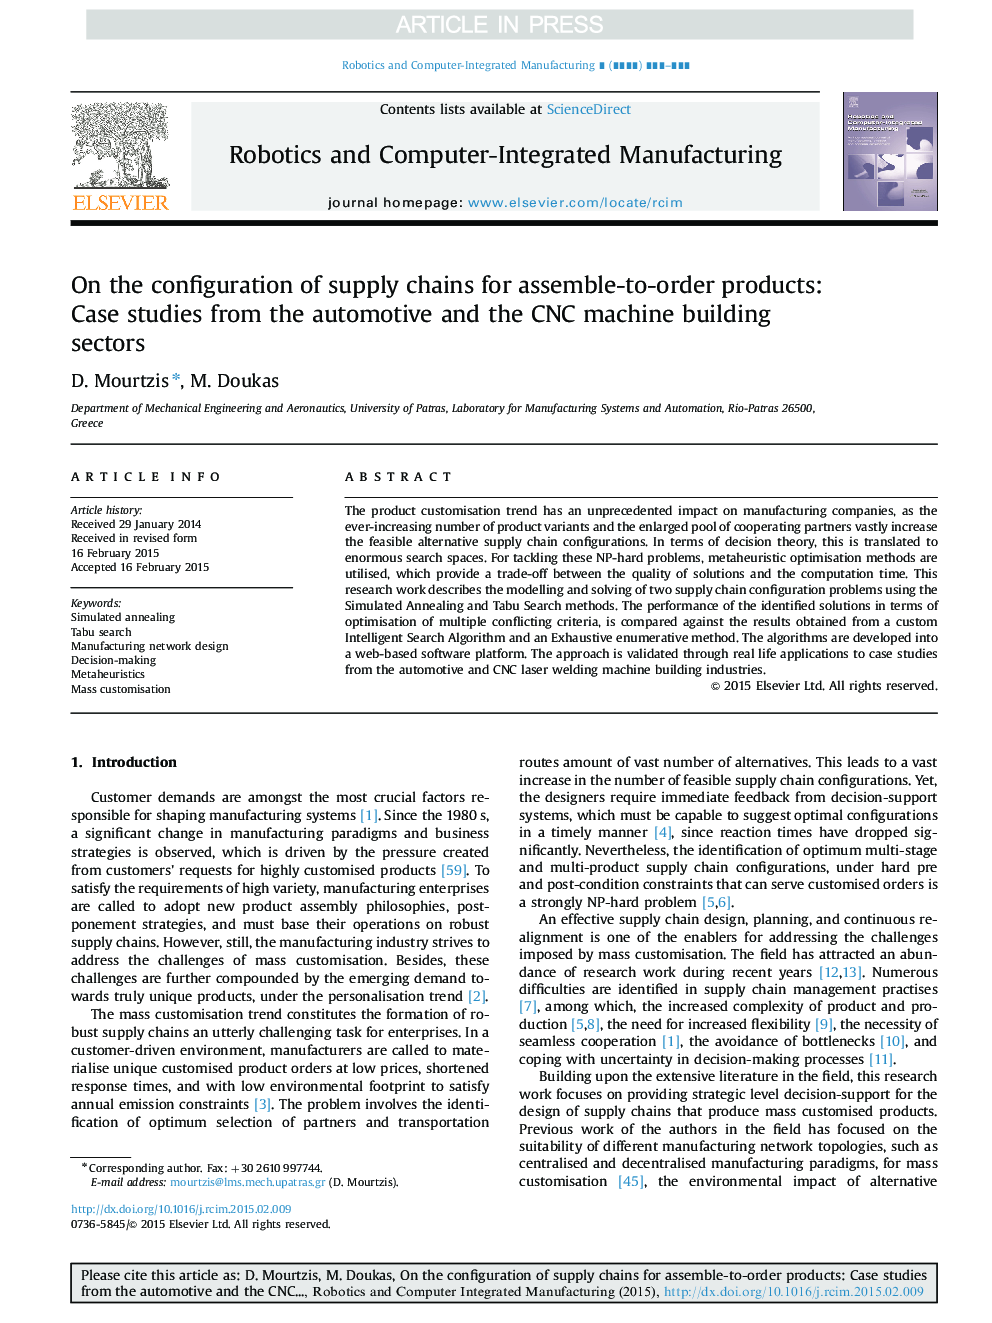 On the configuration of supply chains for assemble-to-order products: Case studies from the automotive and the CNC machine building sectors